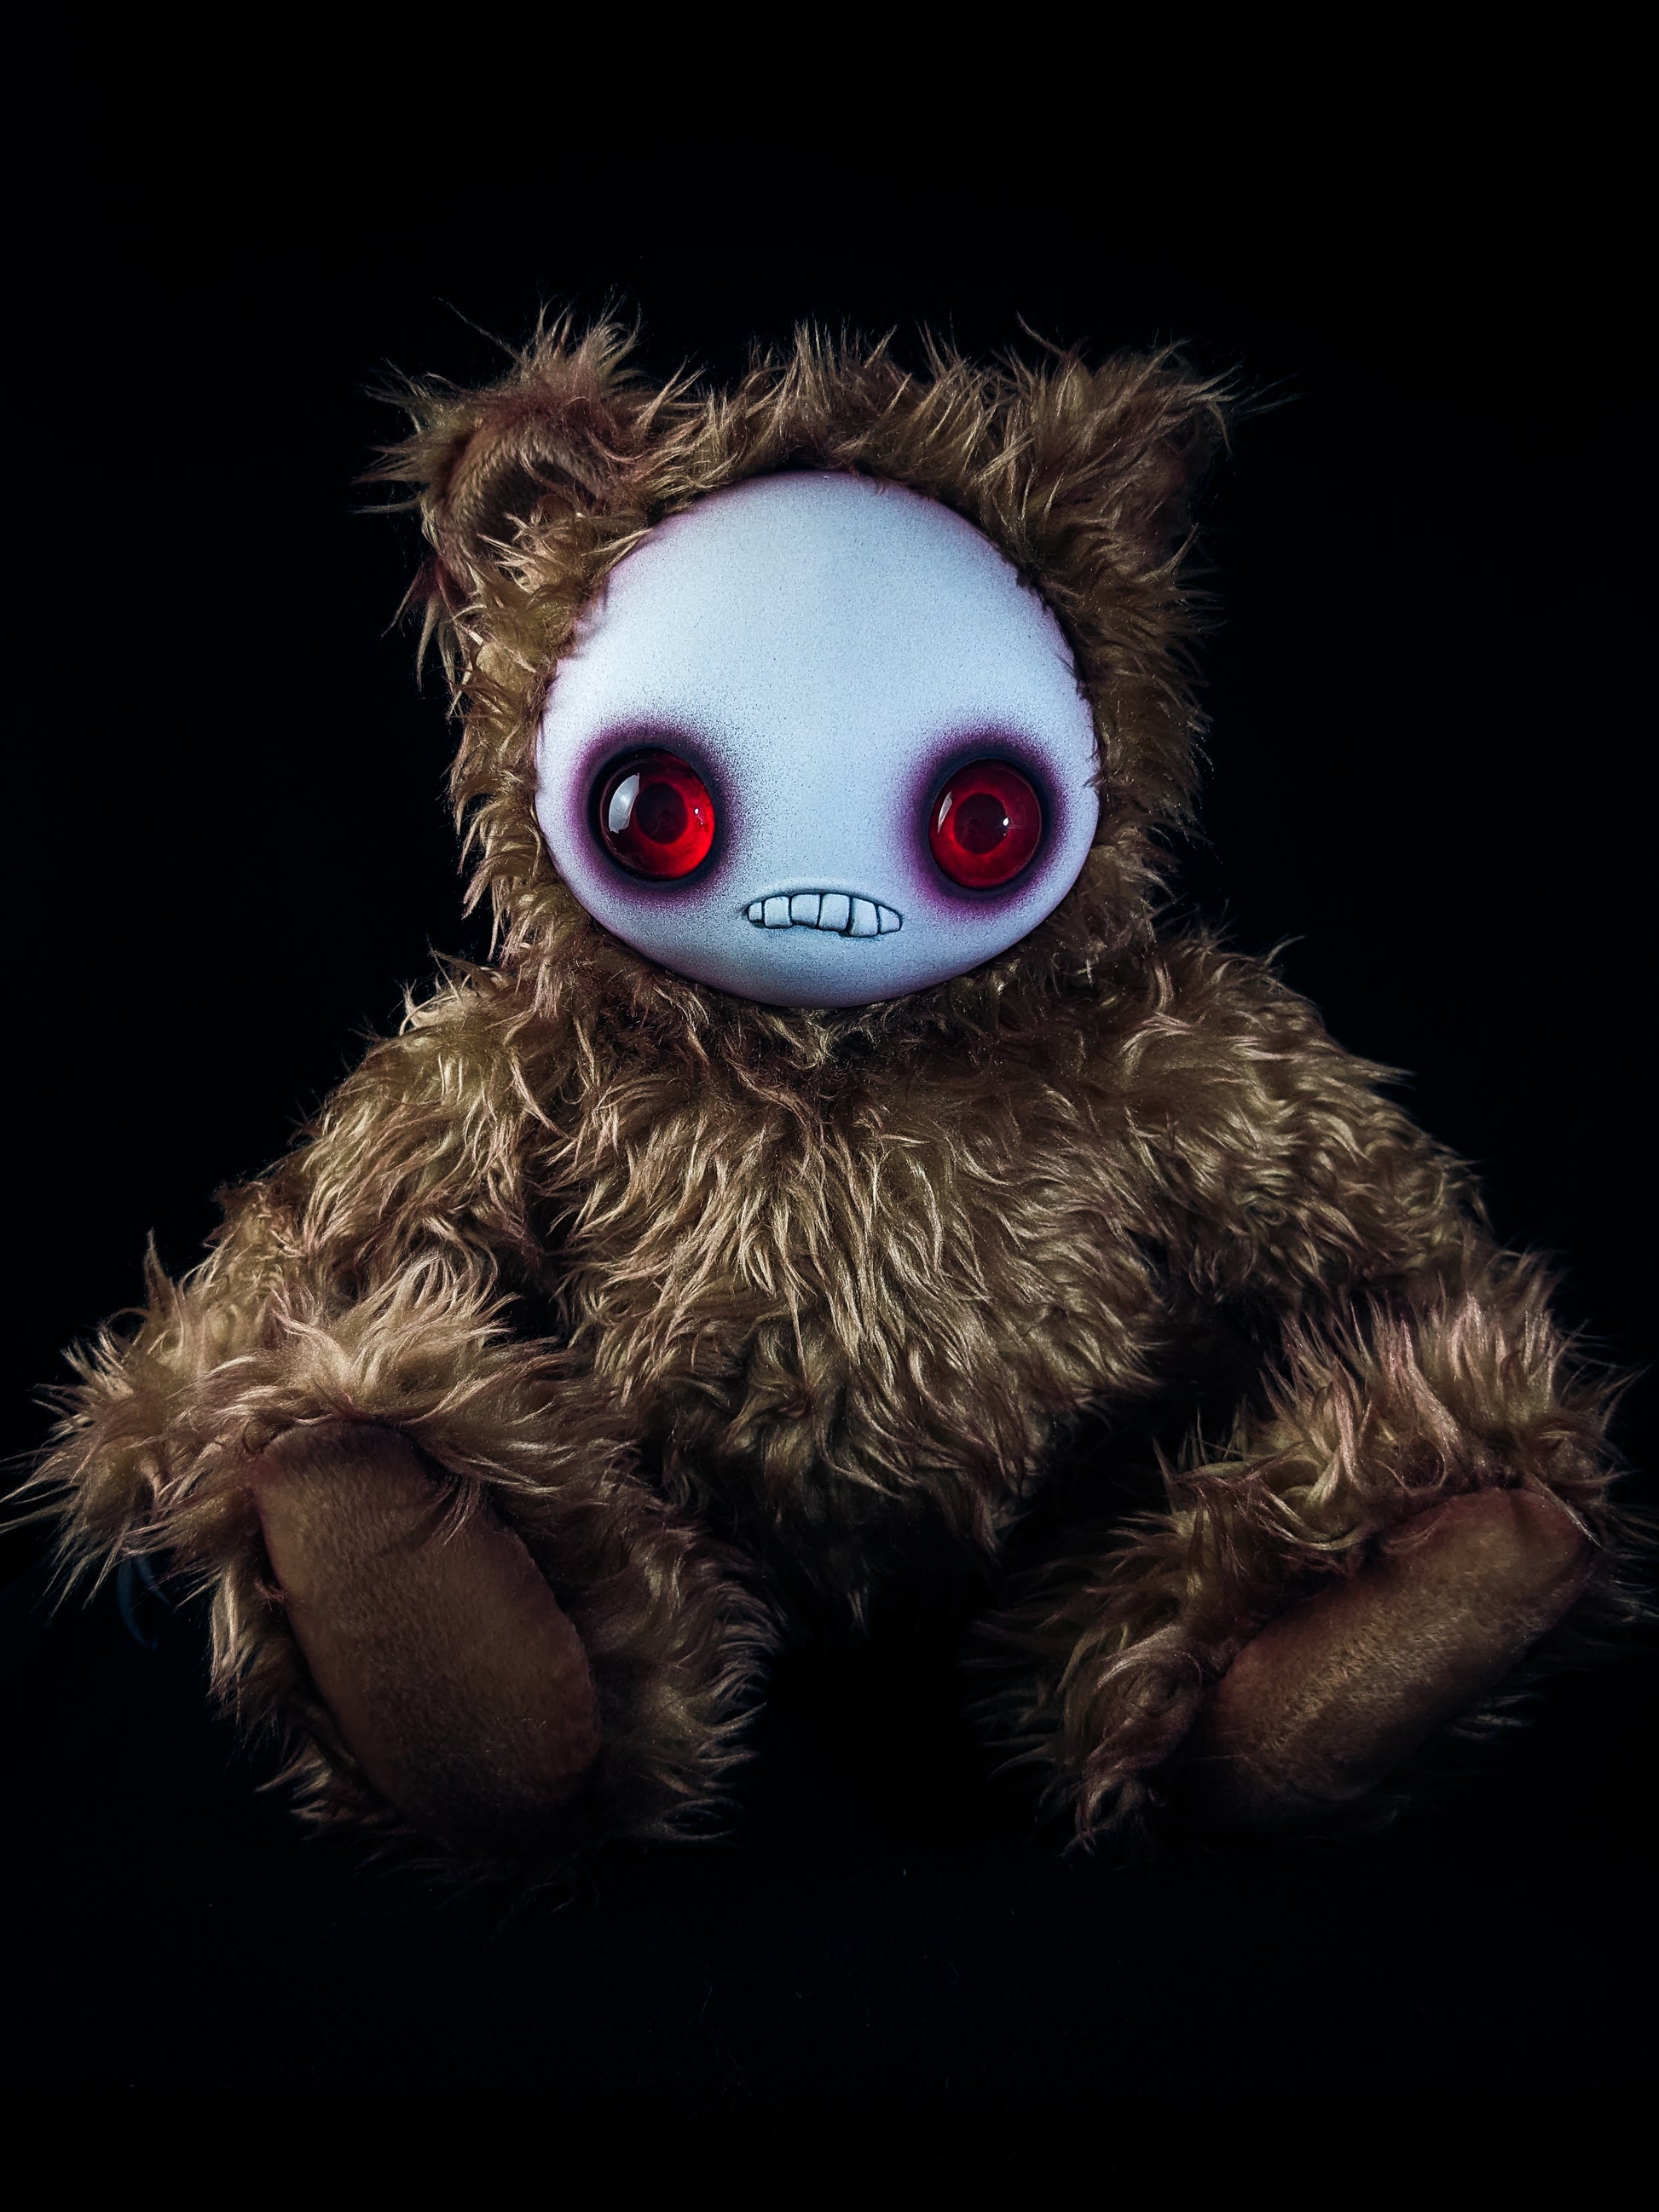 Teething Pains: JITTERS - CRYPTCRITZ Handcrafted Creepy Monster Art Doll Plush Toy for Unhinged Individuals